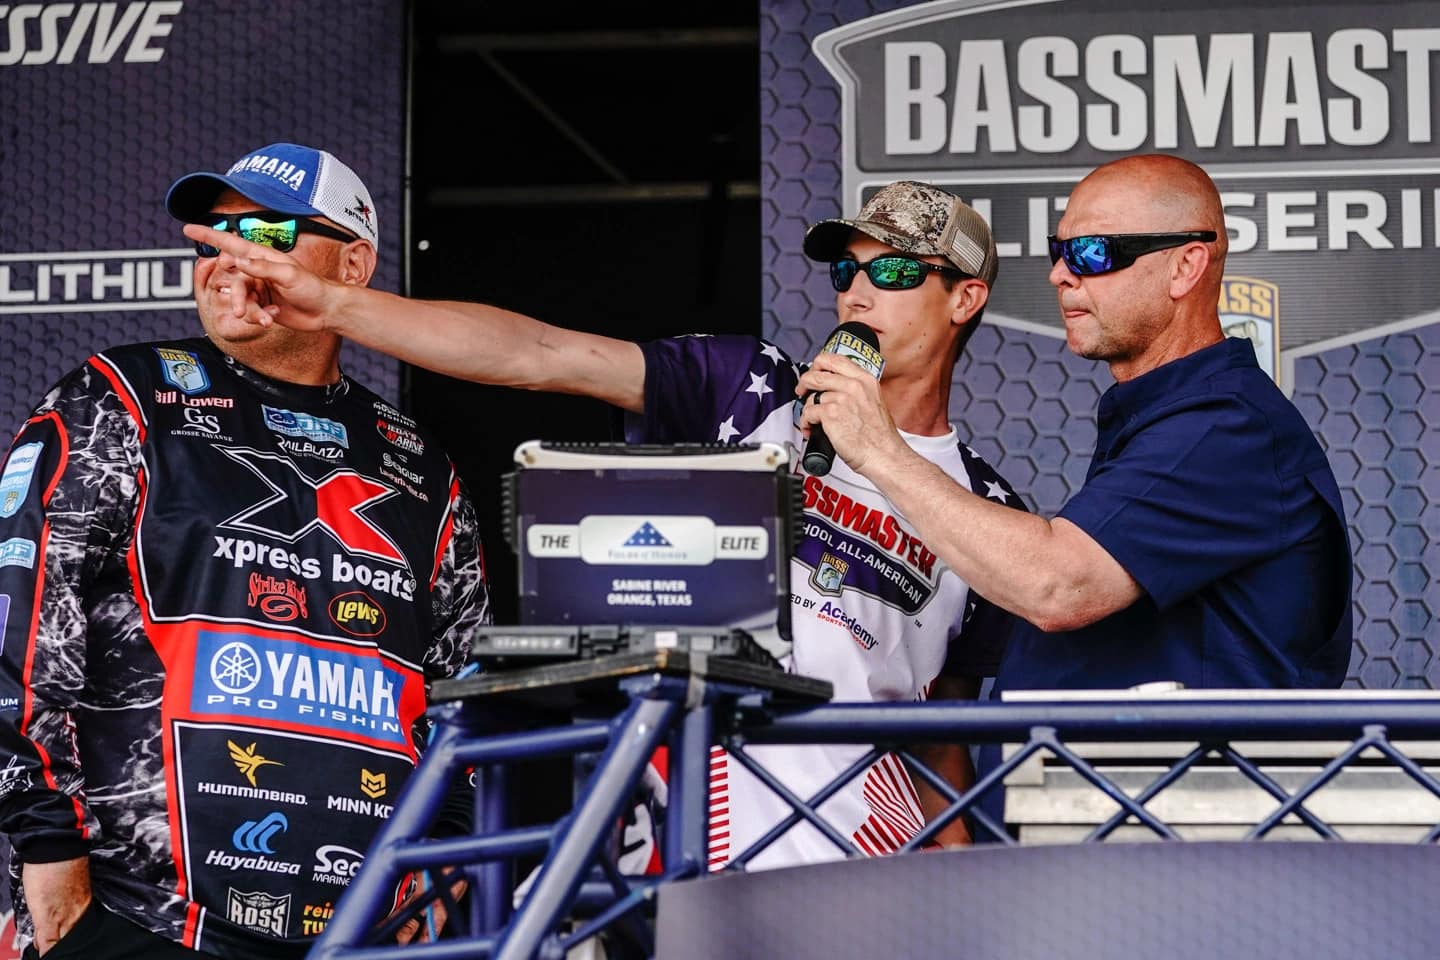 7 Questions With...a Bassmaster All-American from Southeast Texas